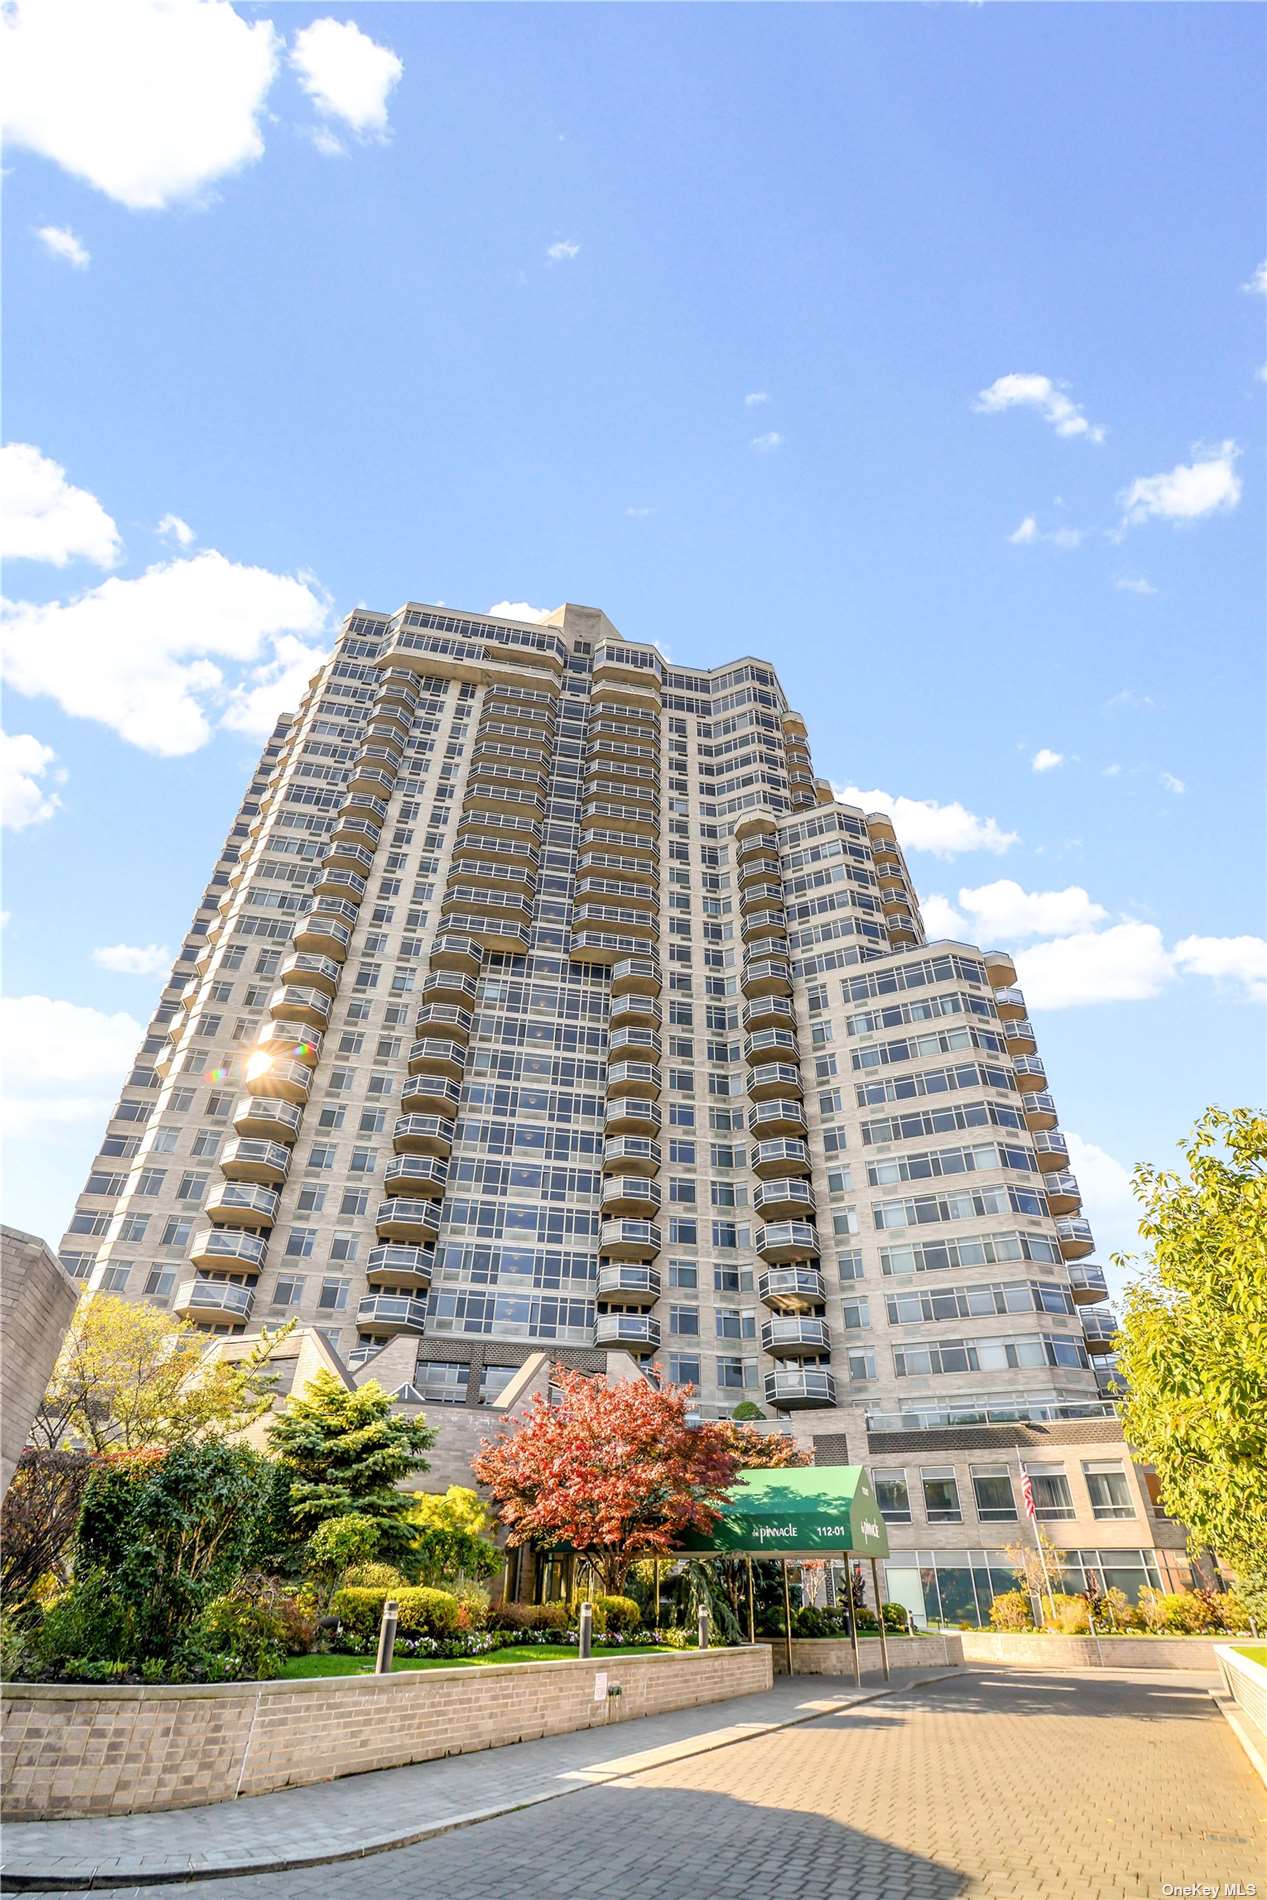 Condo in Forest Hills - Queens  Queens, NY 11375